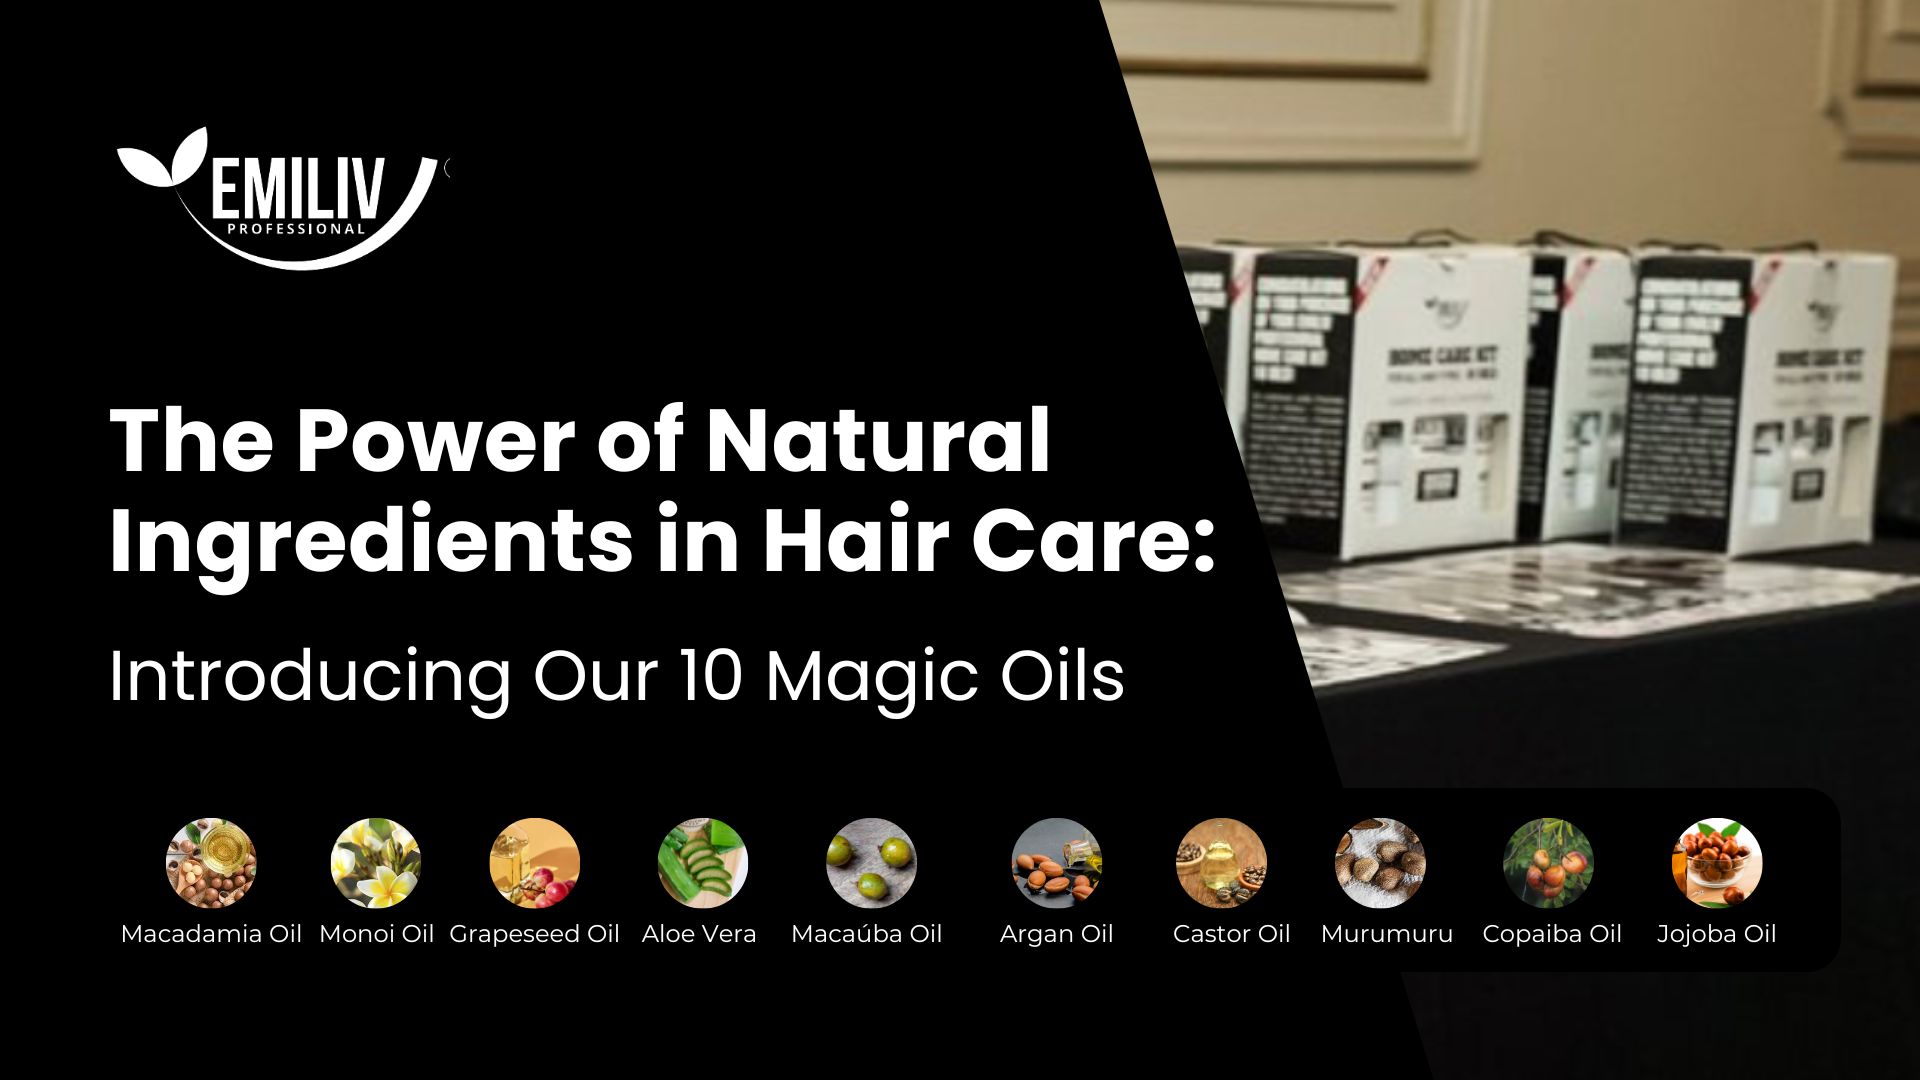 The Power of Natural Ingredients in Hair Care: Introducing Our 10 Magic Oils